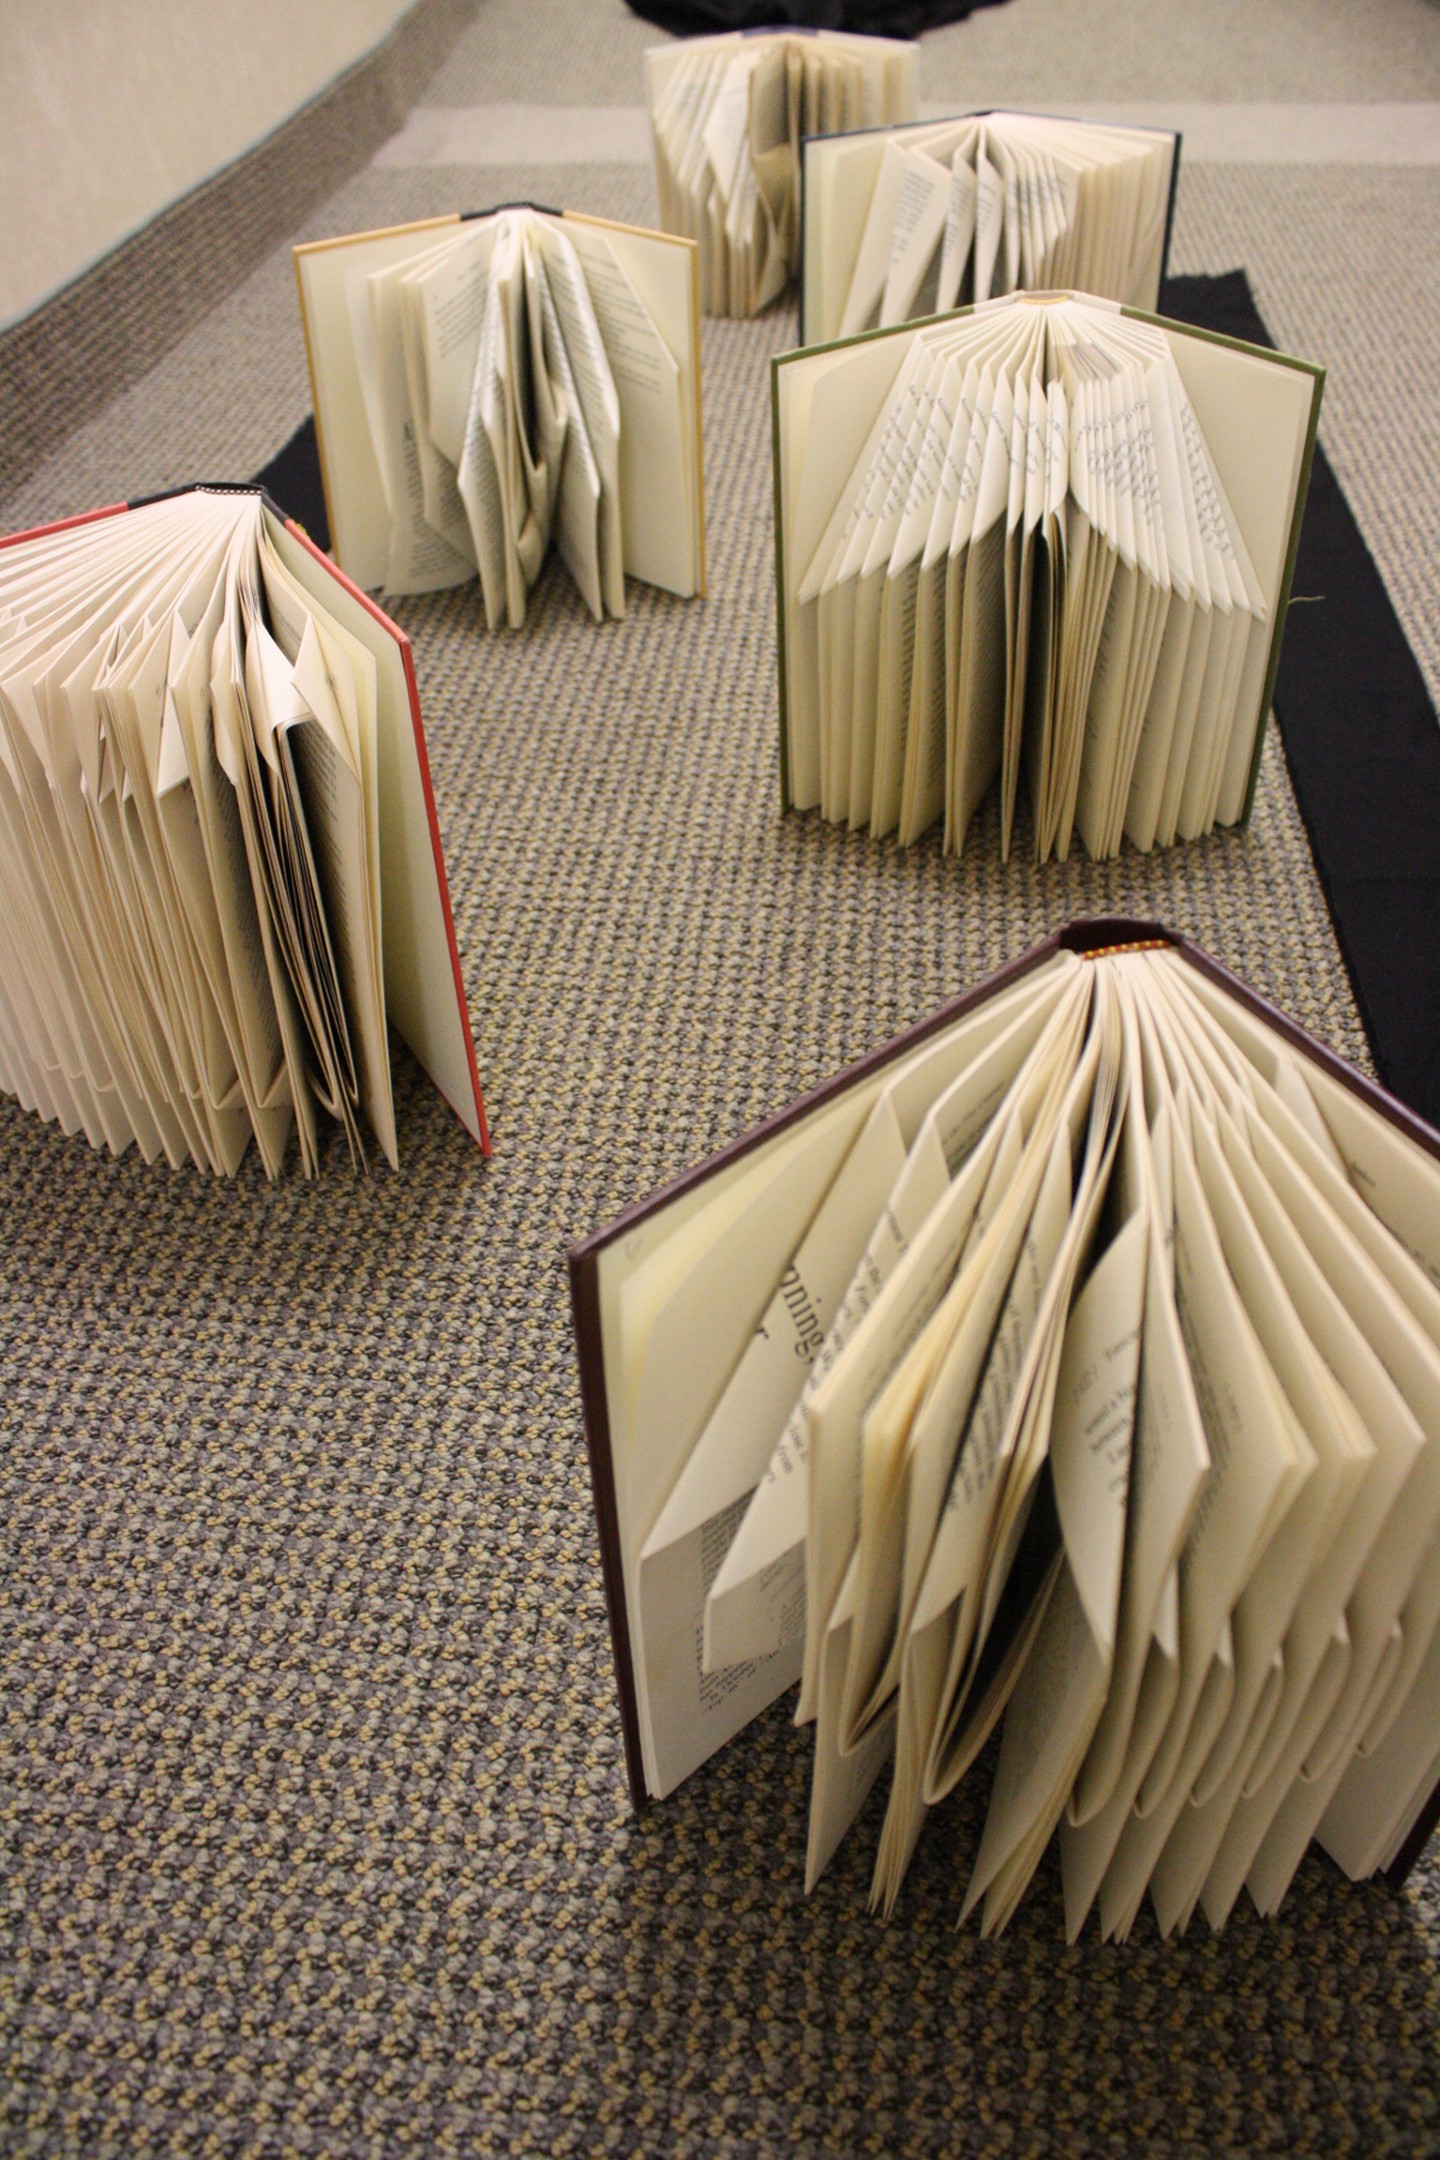 altered book pages